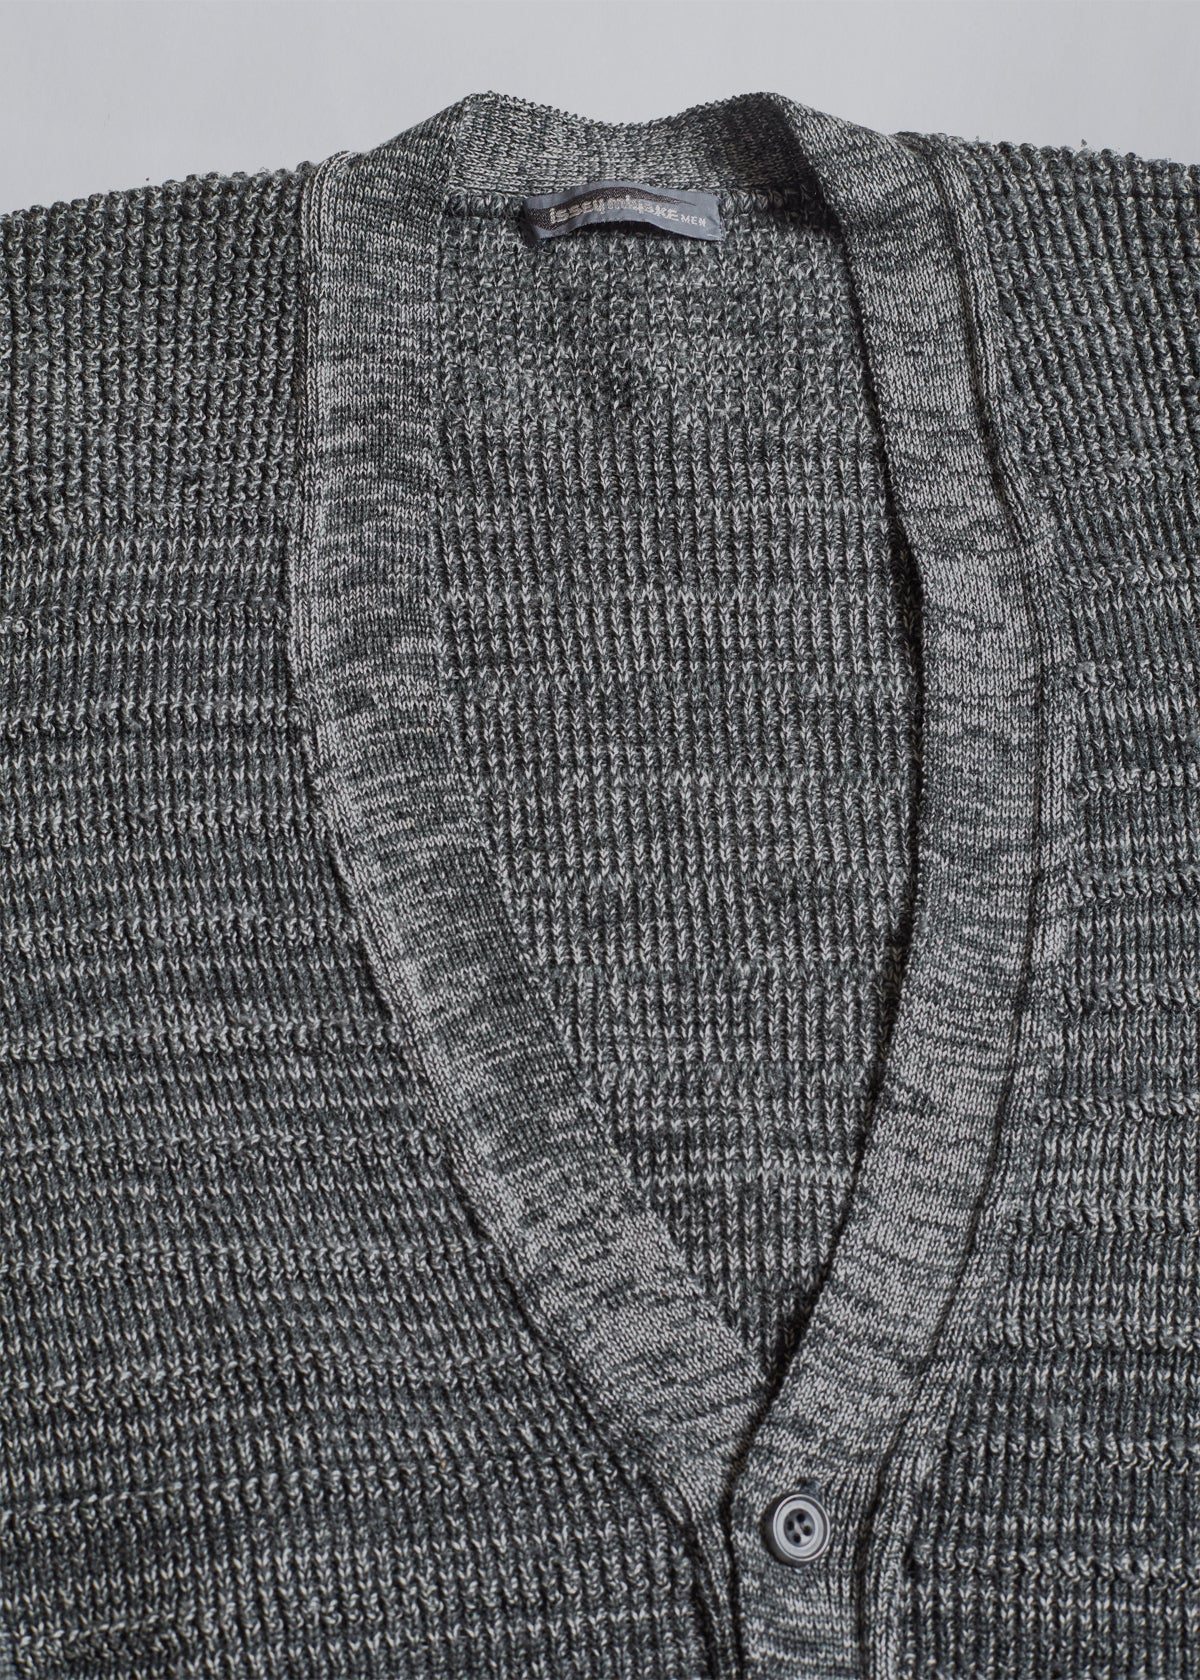 Stripped Cardigan 1980's - Large - The Archivist Store